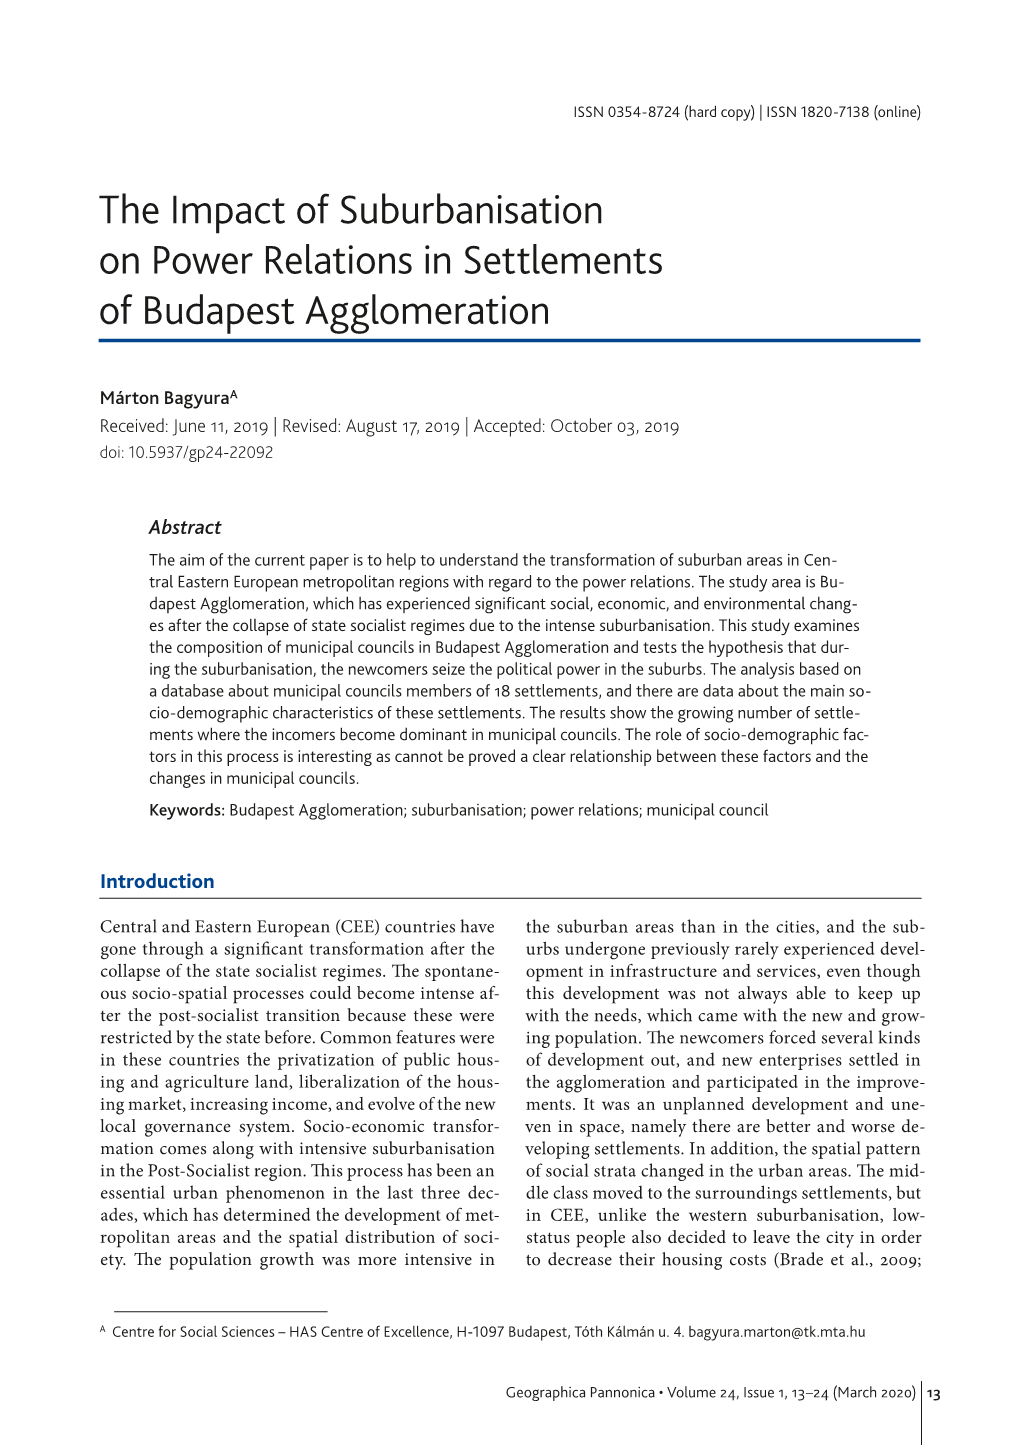 The Impact of Suburbanisation on Power Relations in Settlements of Budapest Agglomeration